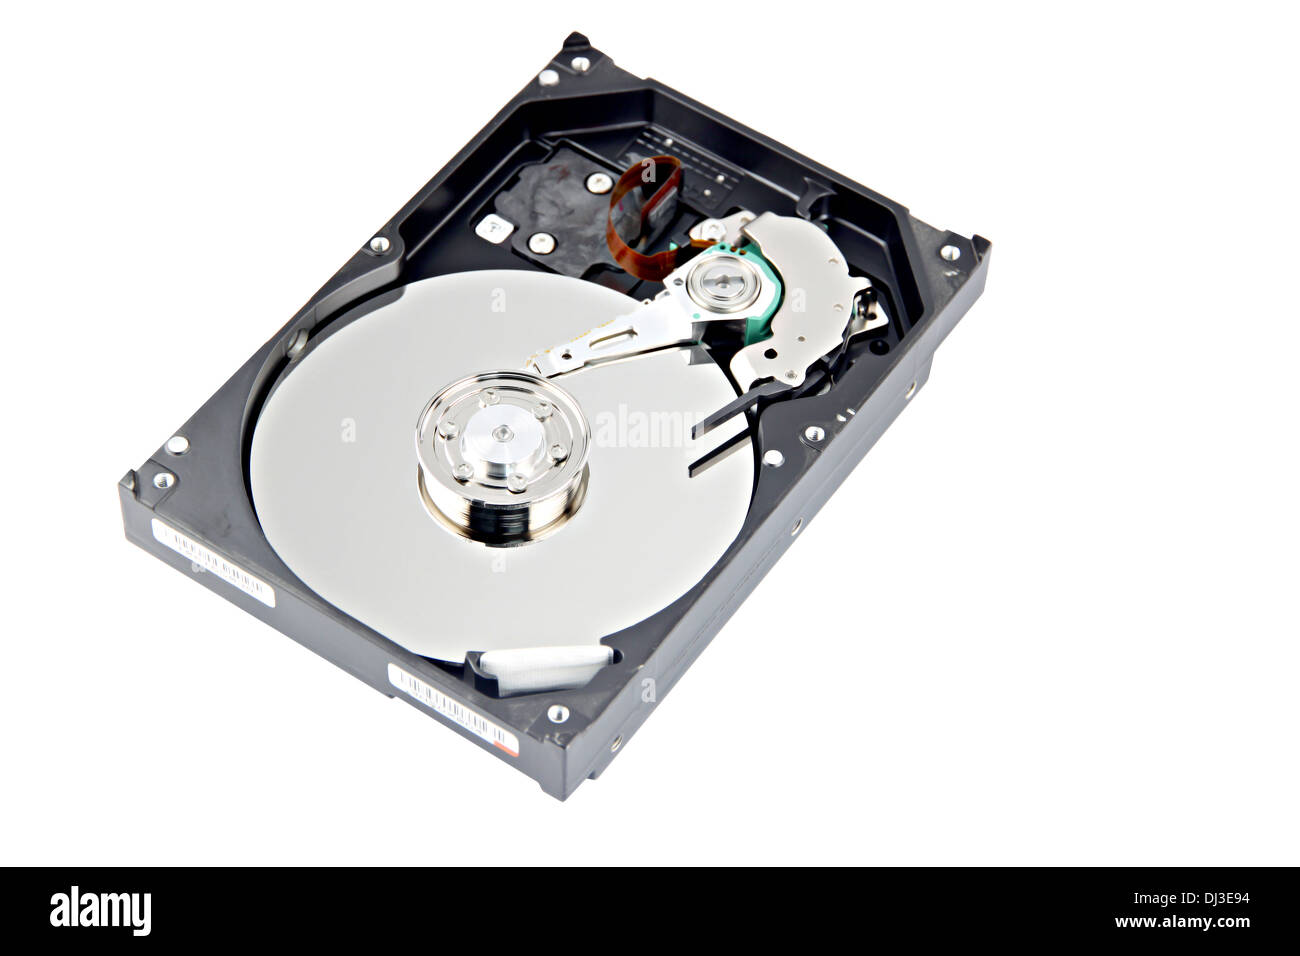 The open Harddisk and focus picture in Disk storage. Stock Photo